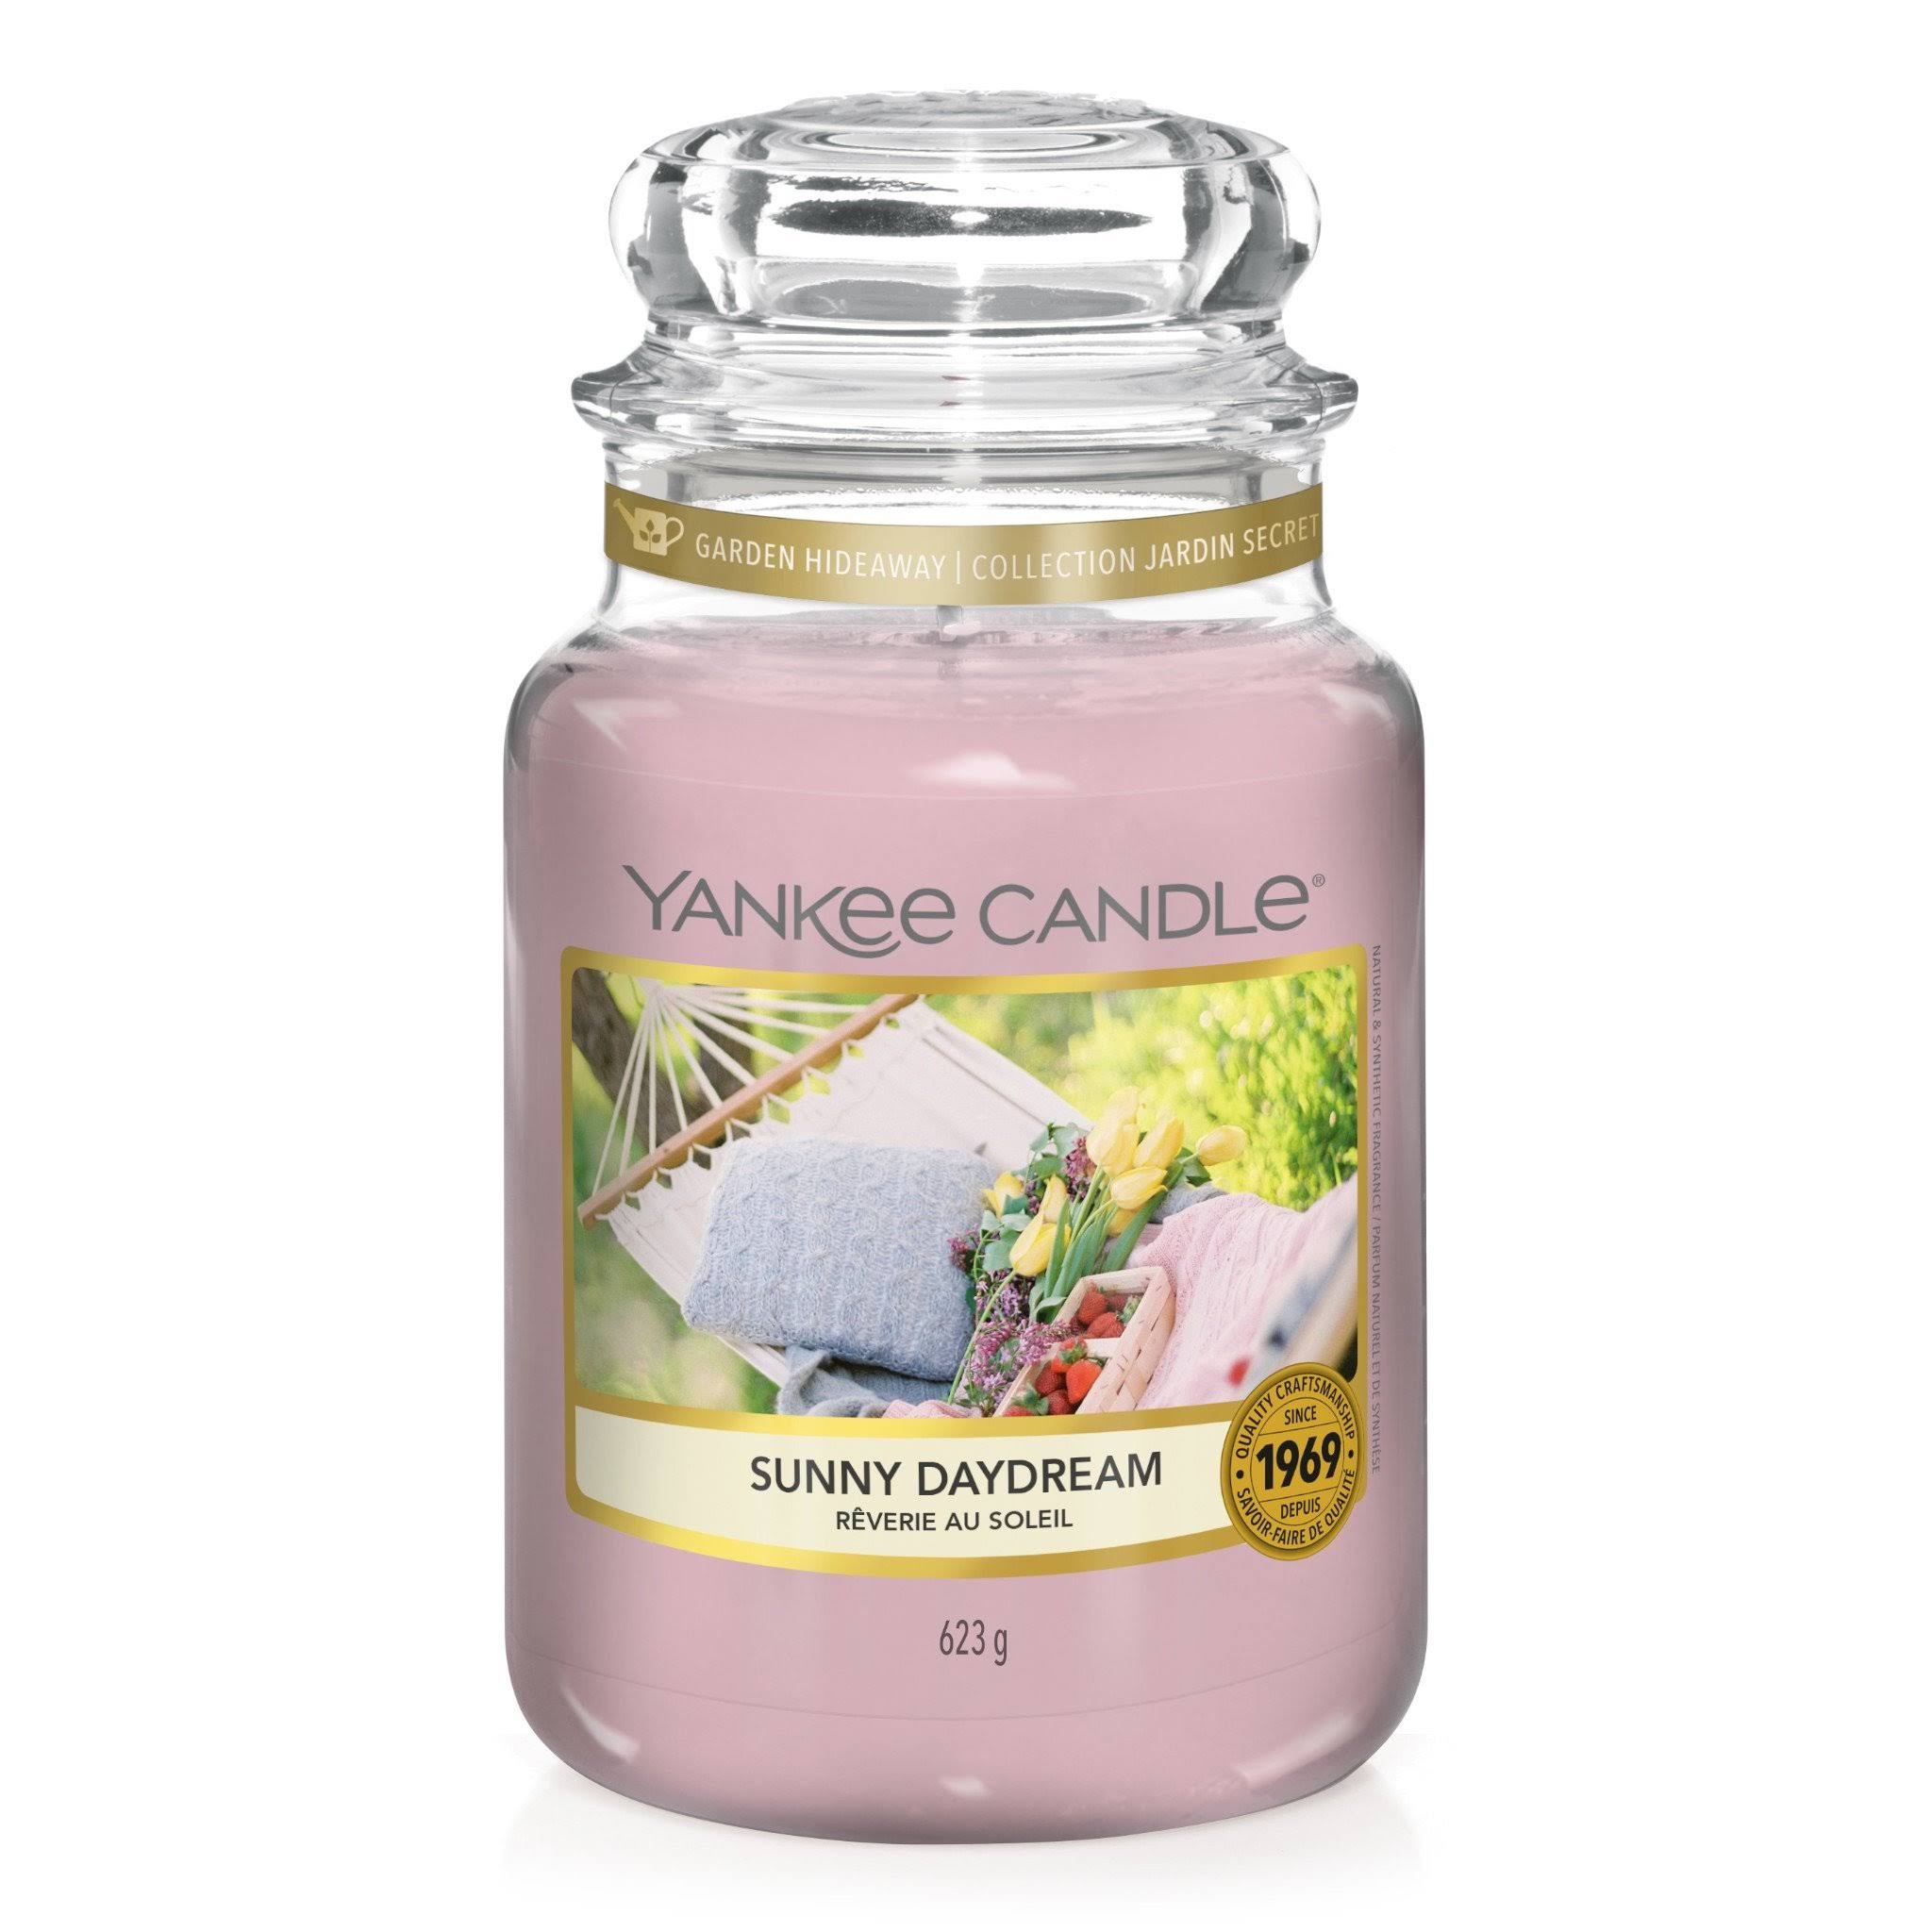 Yankee Candle Sunny Daydream 623 gr candle